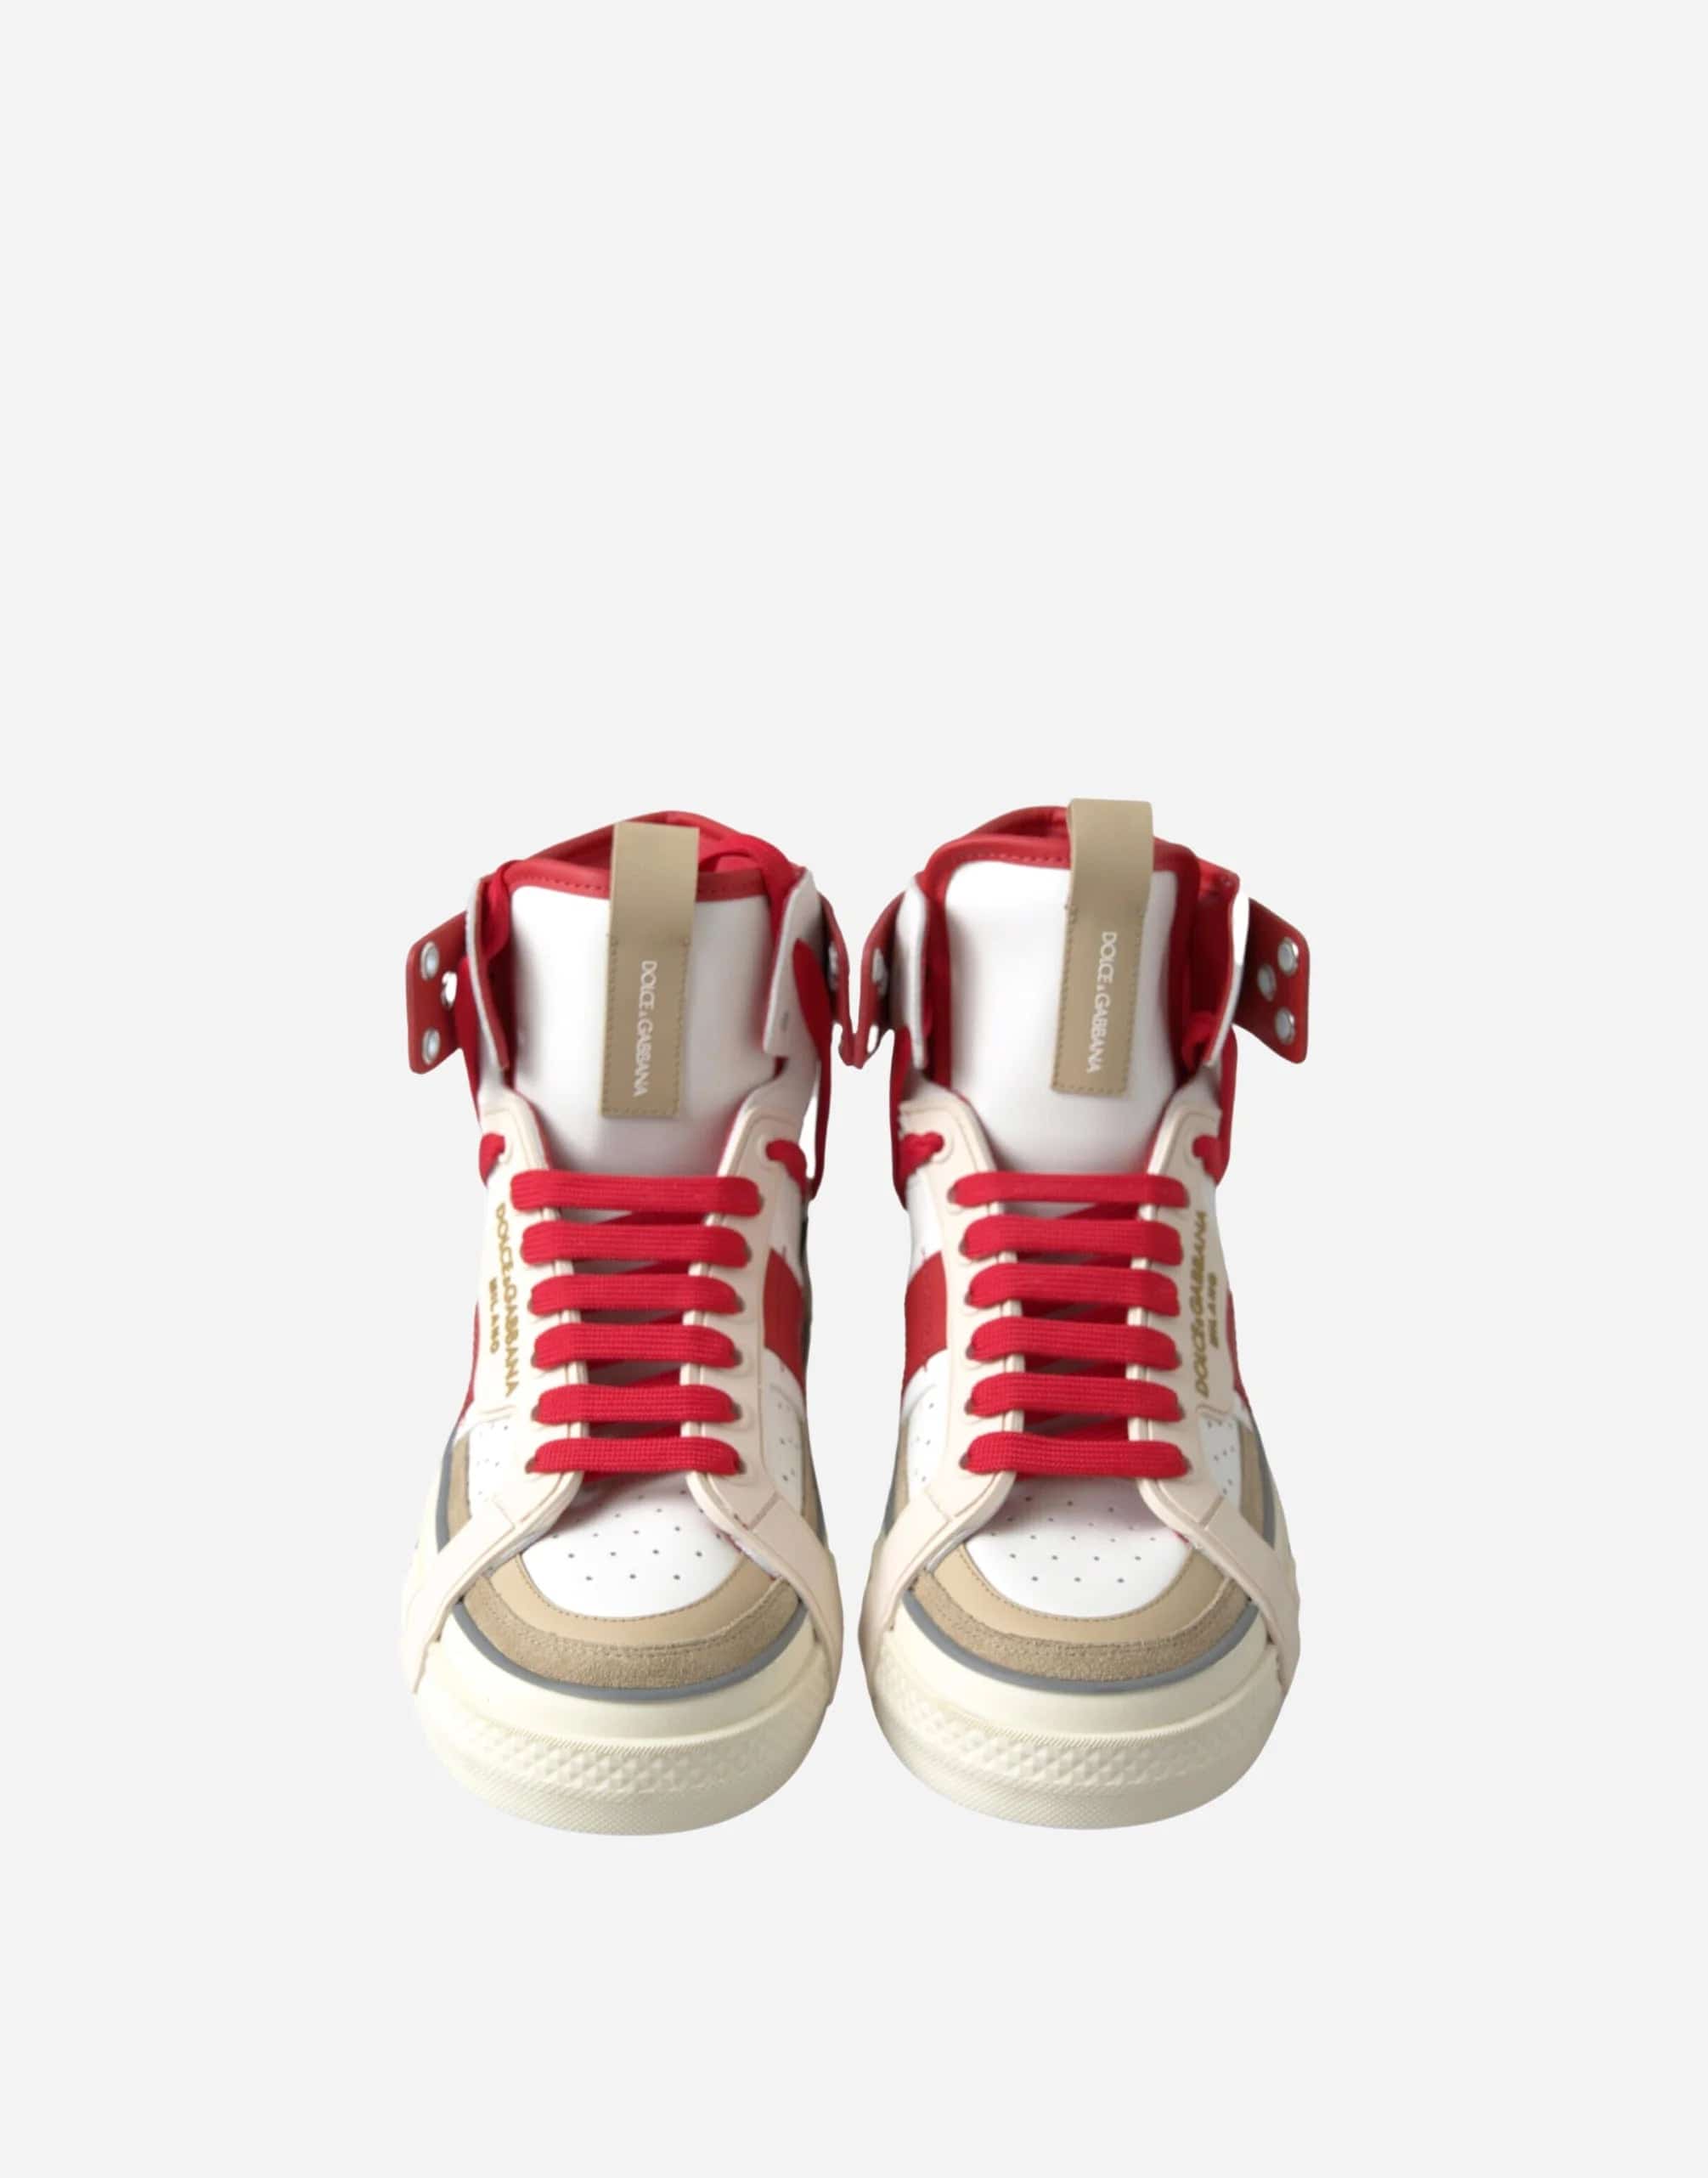 Dolce & Gabbana Multicolor Colorblock Leather High Top Sneakers Shoes (USE GATEWAY IMAGES DUE TO CREASE IN TONGUE)